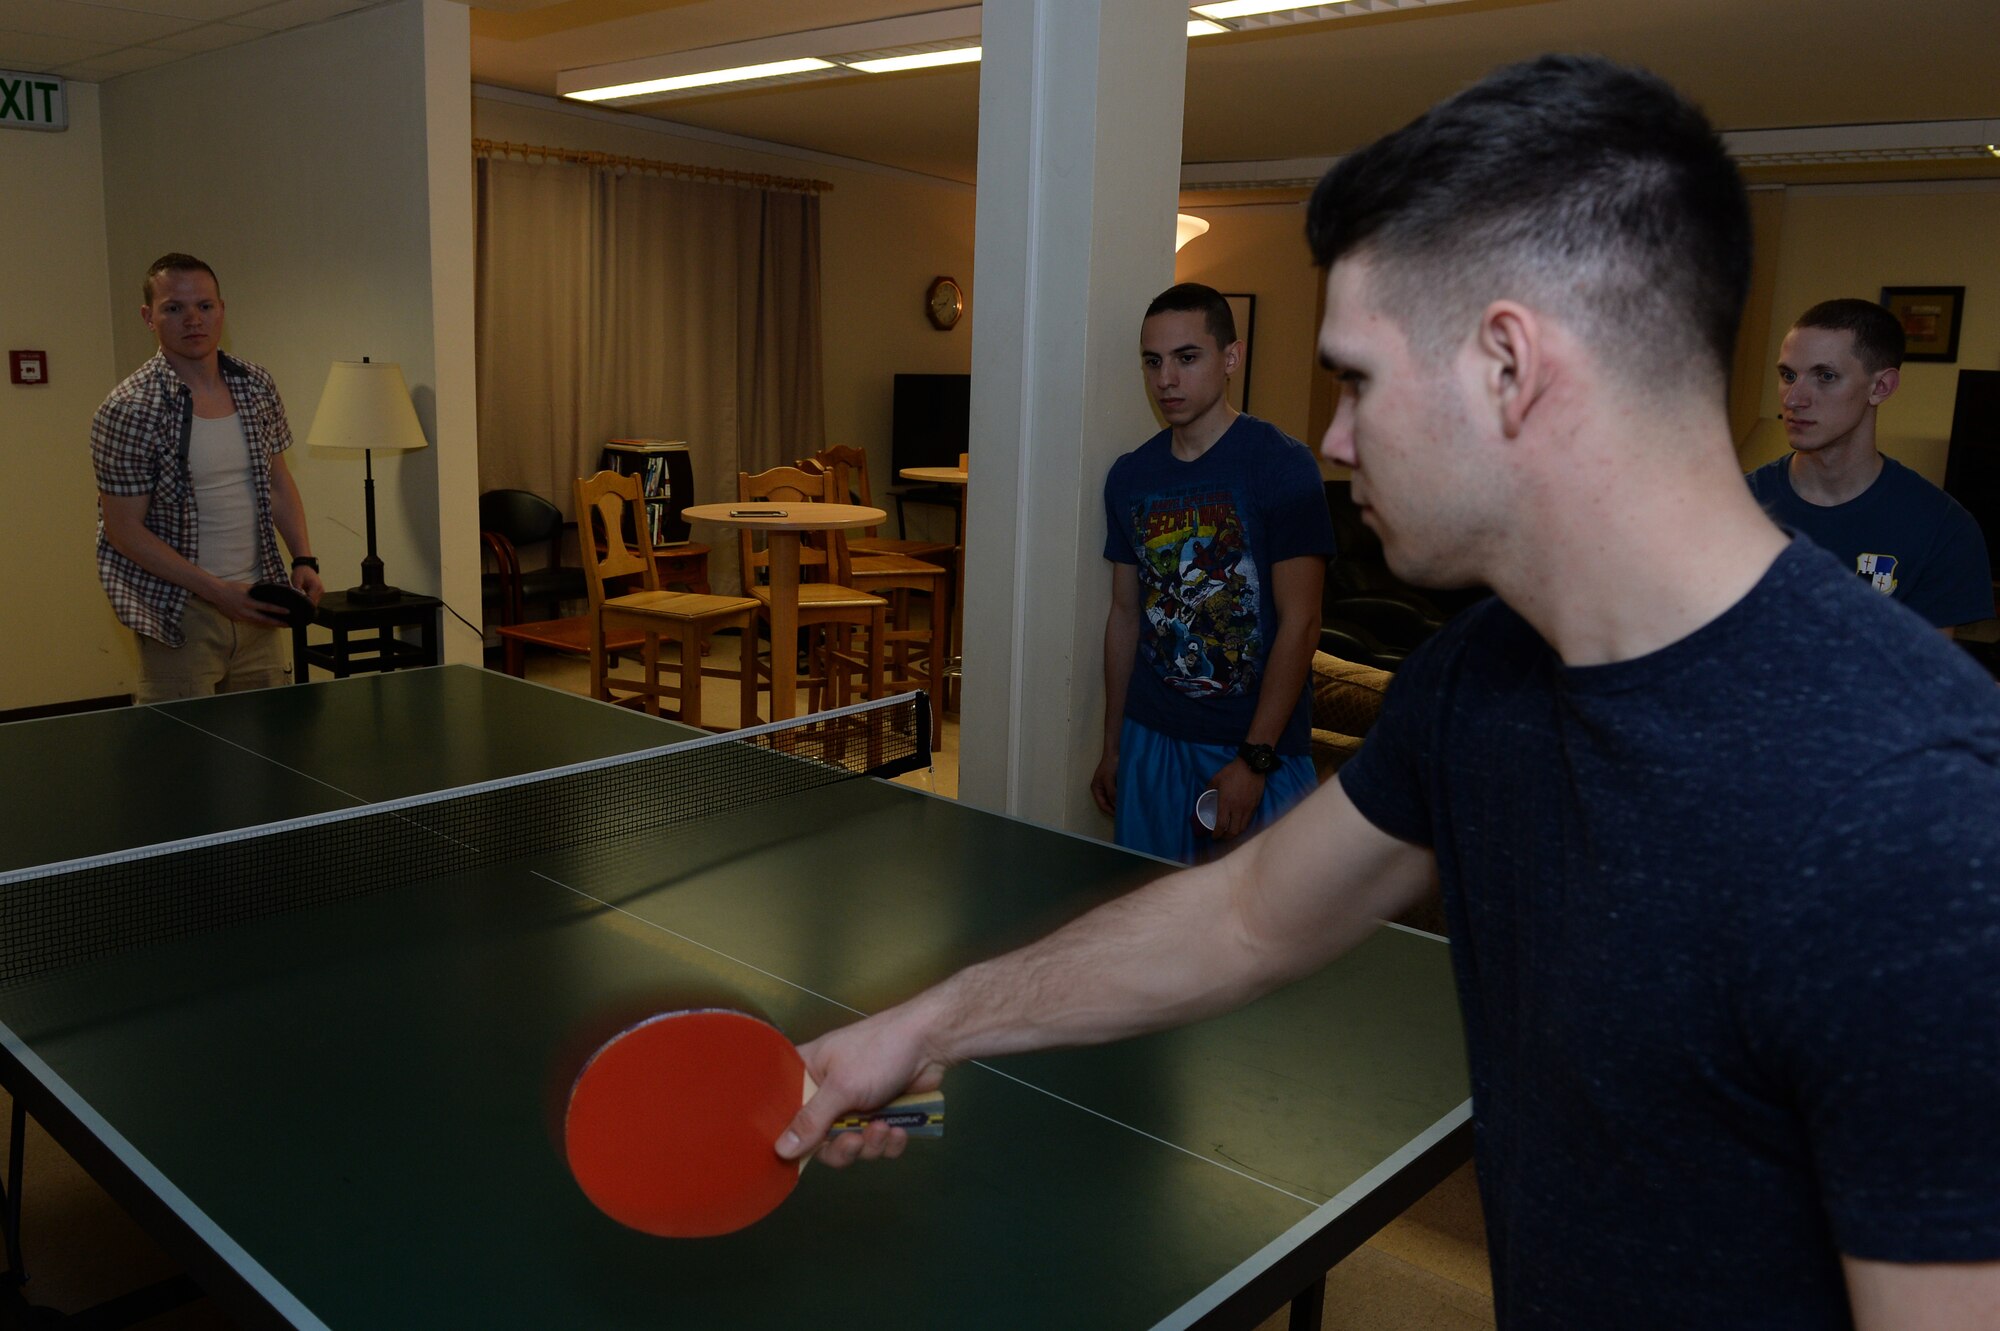 Two U.S. Air Force Airman play pingpong as others look on April 10, 2015, at the Coffee Mill on Spangdahlem Air Base, Germany. The chapel recently decided to expand the hours of operations to Tuesday-Wednesday from 6-10 p.m., Thursday from 7:30-10 p.m. and Friday-Saturday from 7-11 p.m. (U.S. Air Force photo by Senior Airman Dylan Nuckolls/Released)